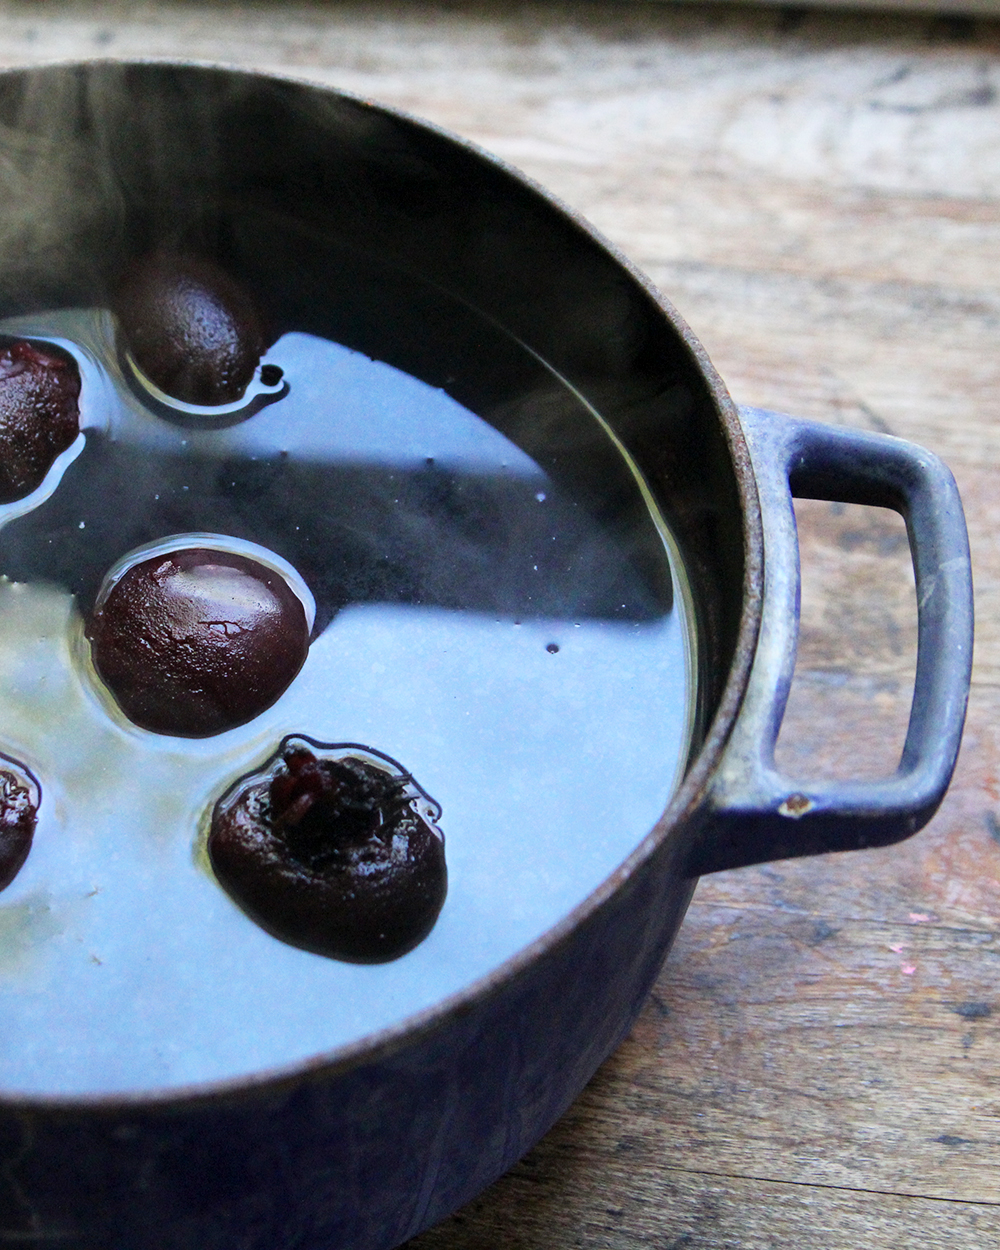 A blue pot is shown on a wooden counter. It's filled with beets submerged in water. 